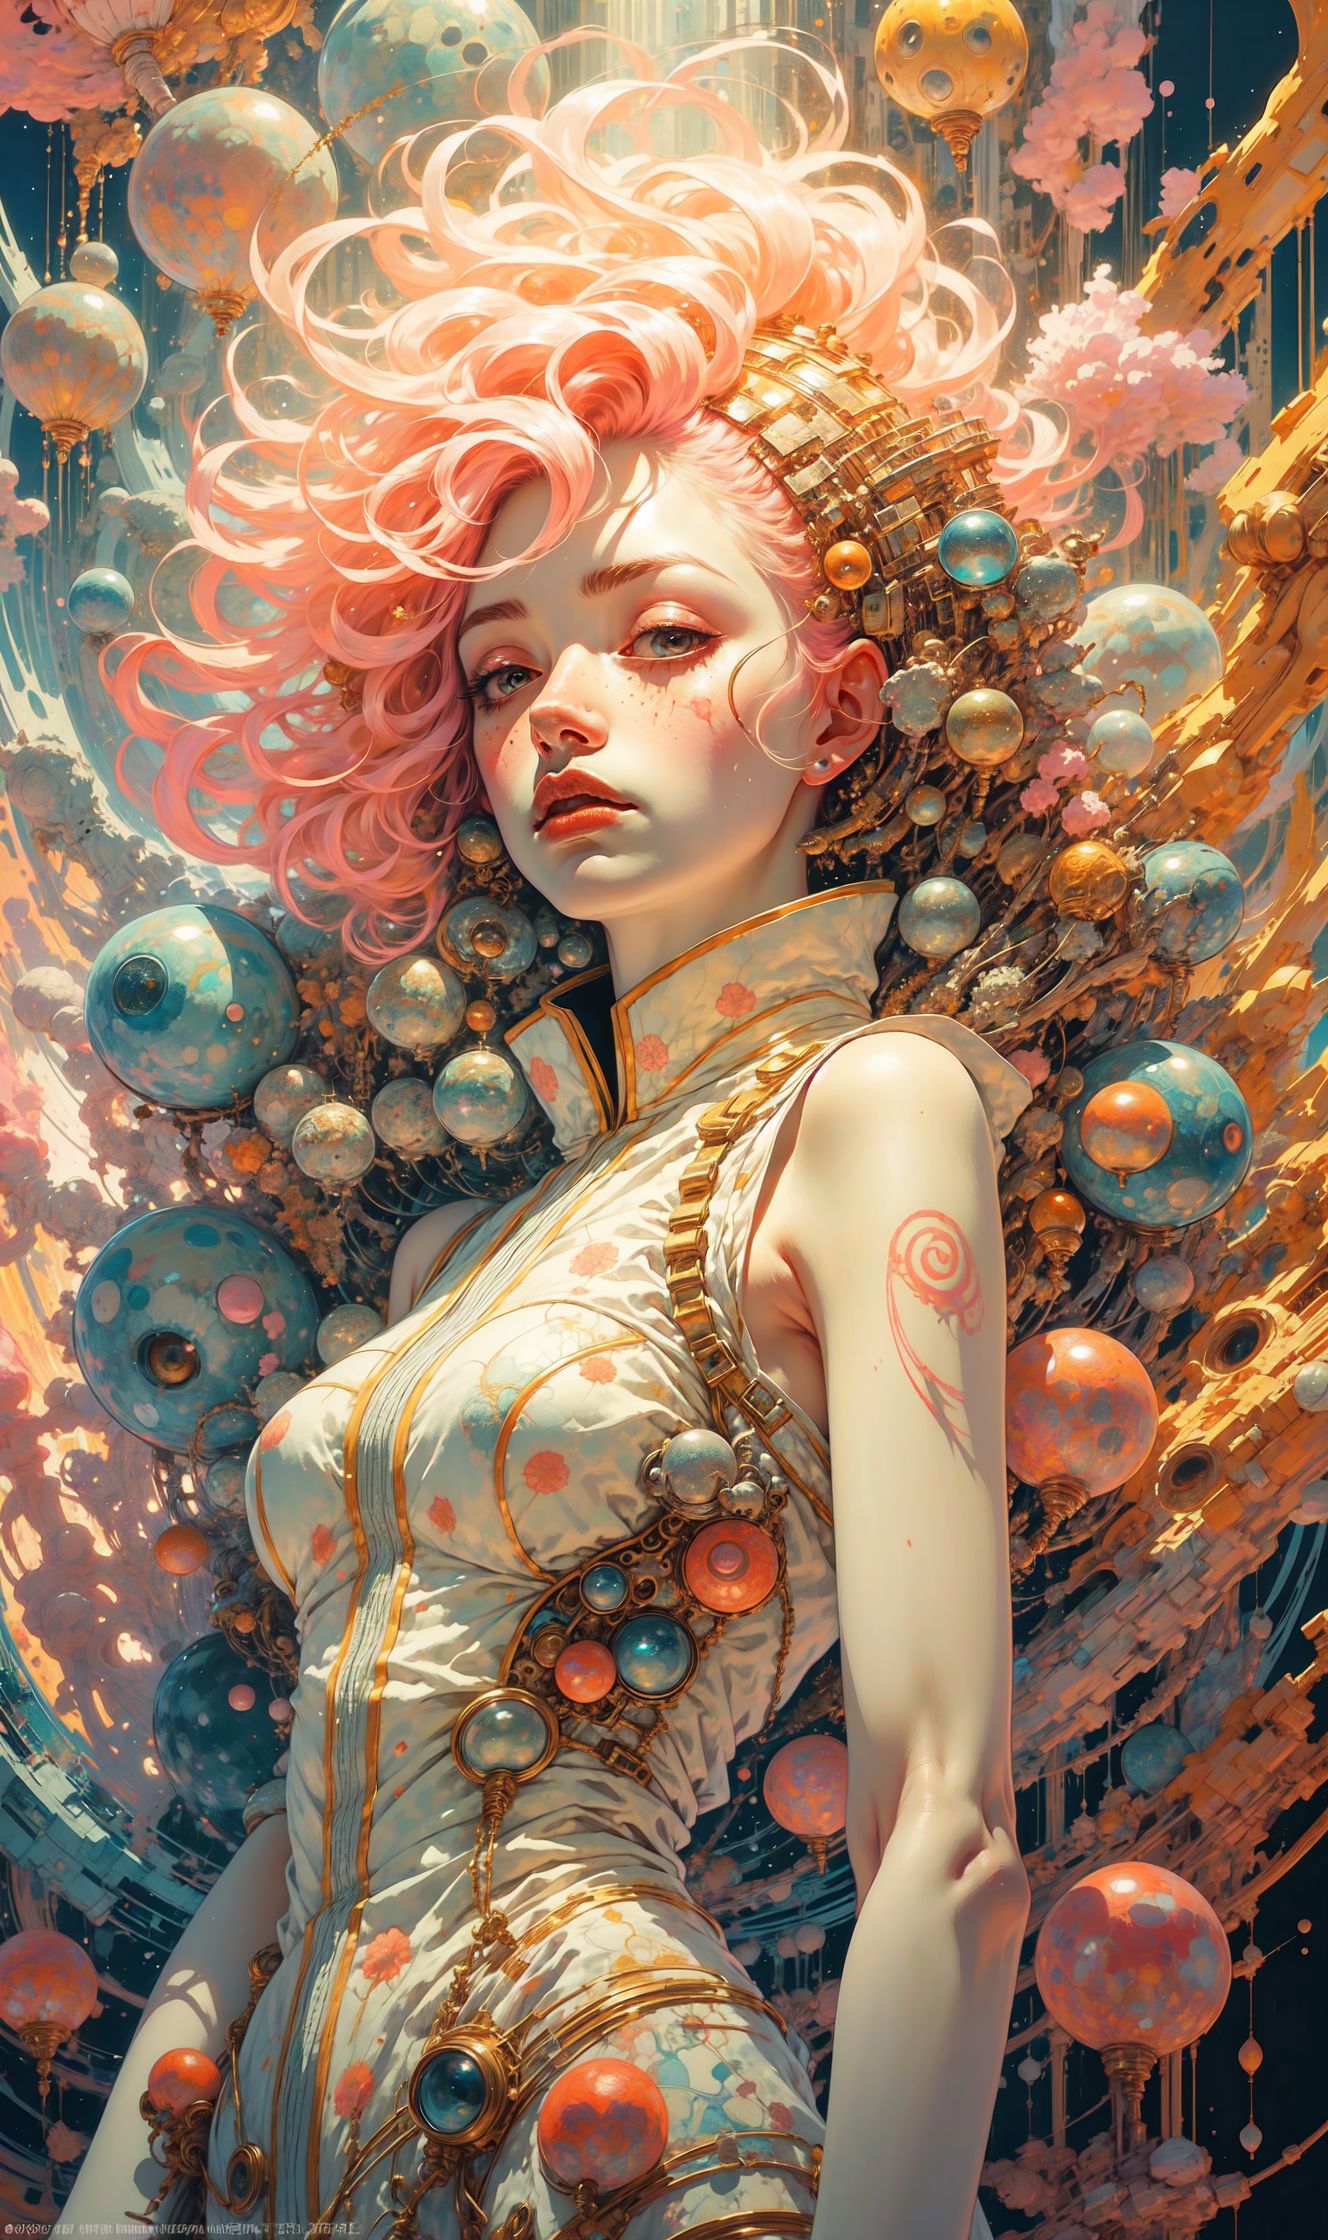 A woman in a white dress with pink hair and a tattoo on her arm, surrounded by various colorful balls and orbs.